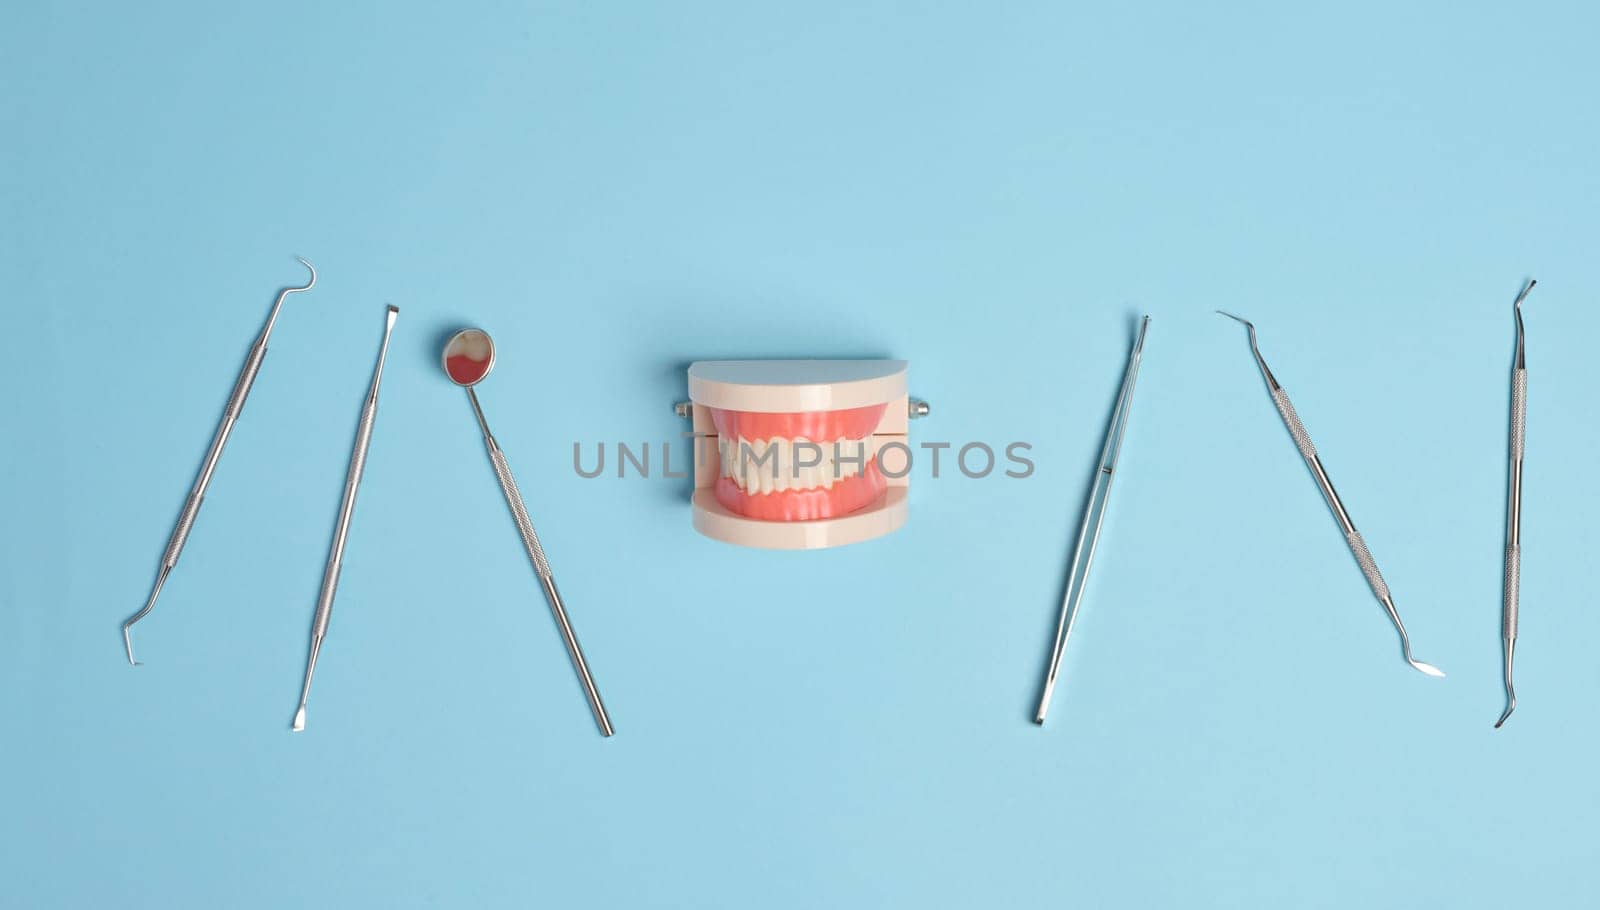 Plastic model of human jaw with white even teeth and a medical examination mirror, tweezers on a blue background, oral hygiene